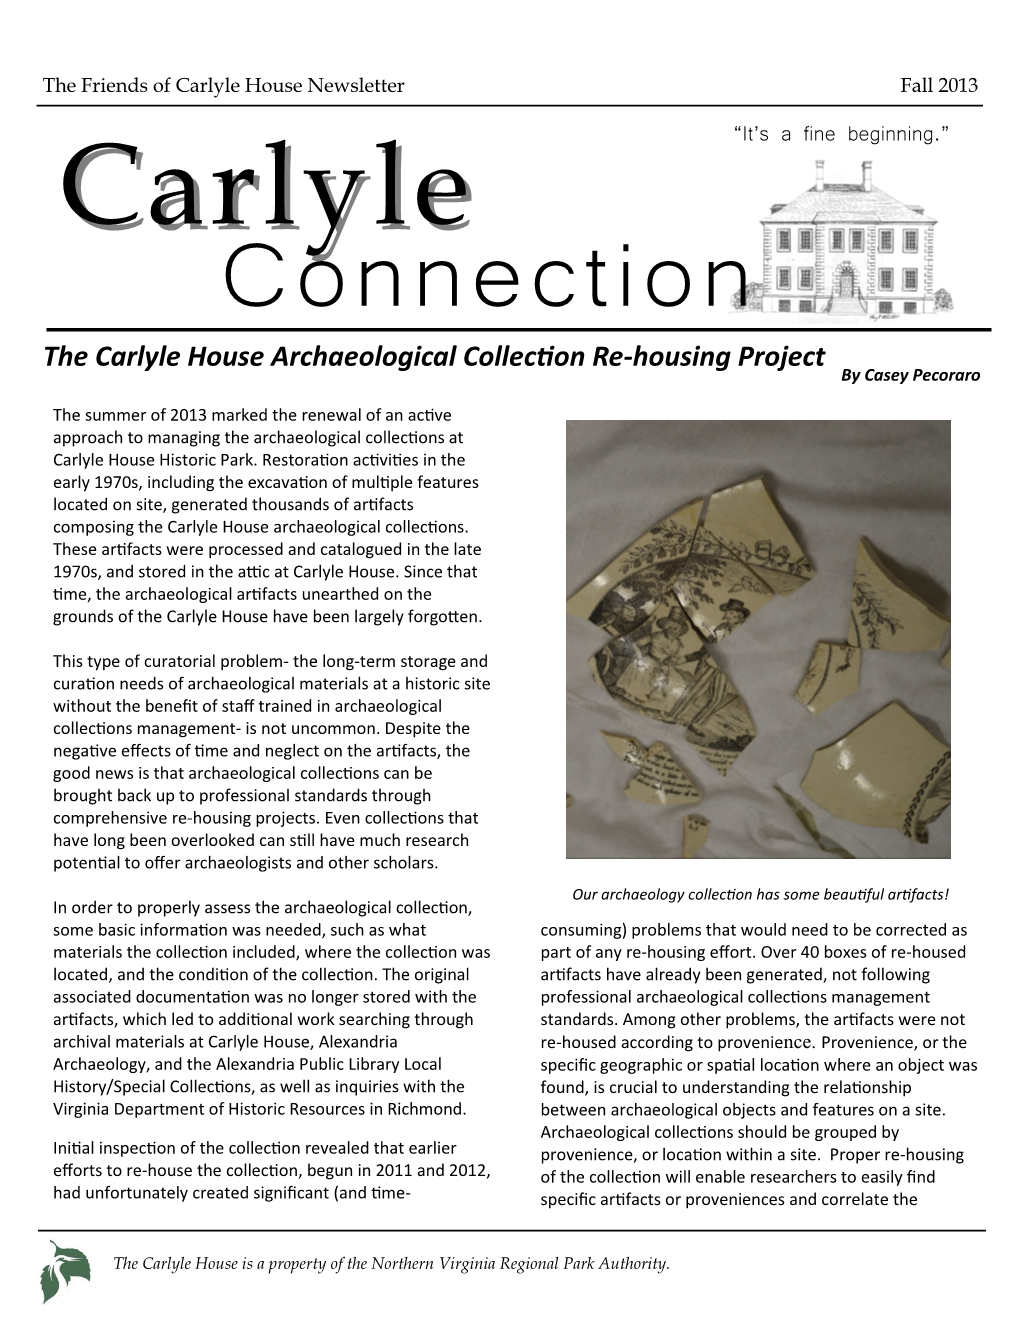 The Carlyle House Archaeological Collection Re-Housing Project by Casey Pecoraro